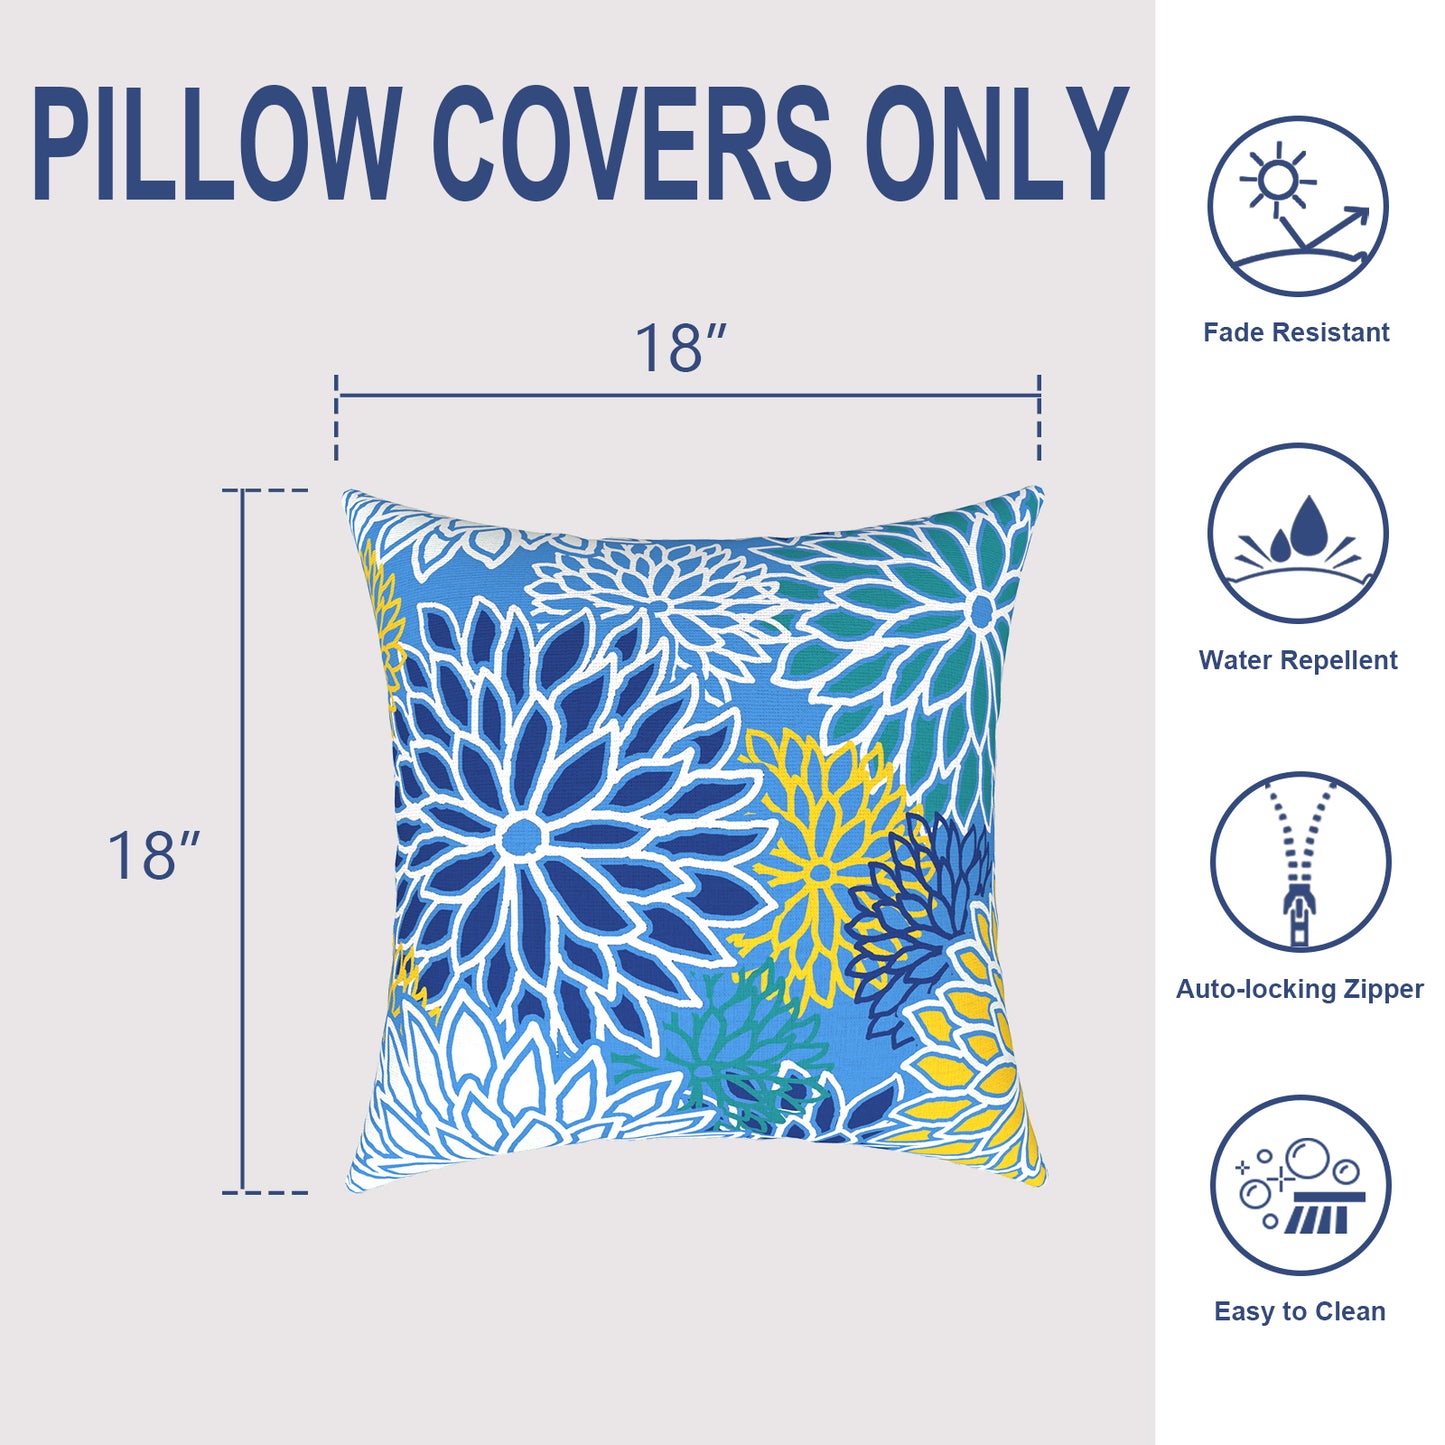 Melody Elephant Outdoor Throw Pillow Covers Pack of 2, Decorative Water Repellent Square Pillow Cases 18x18 Inch, Patio Pillowcases for Home Patio Furniture Use, Dahlia Blue